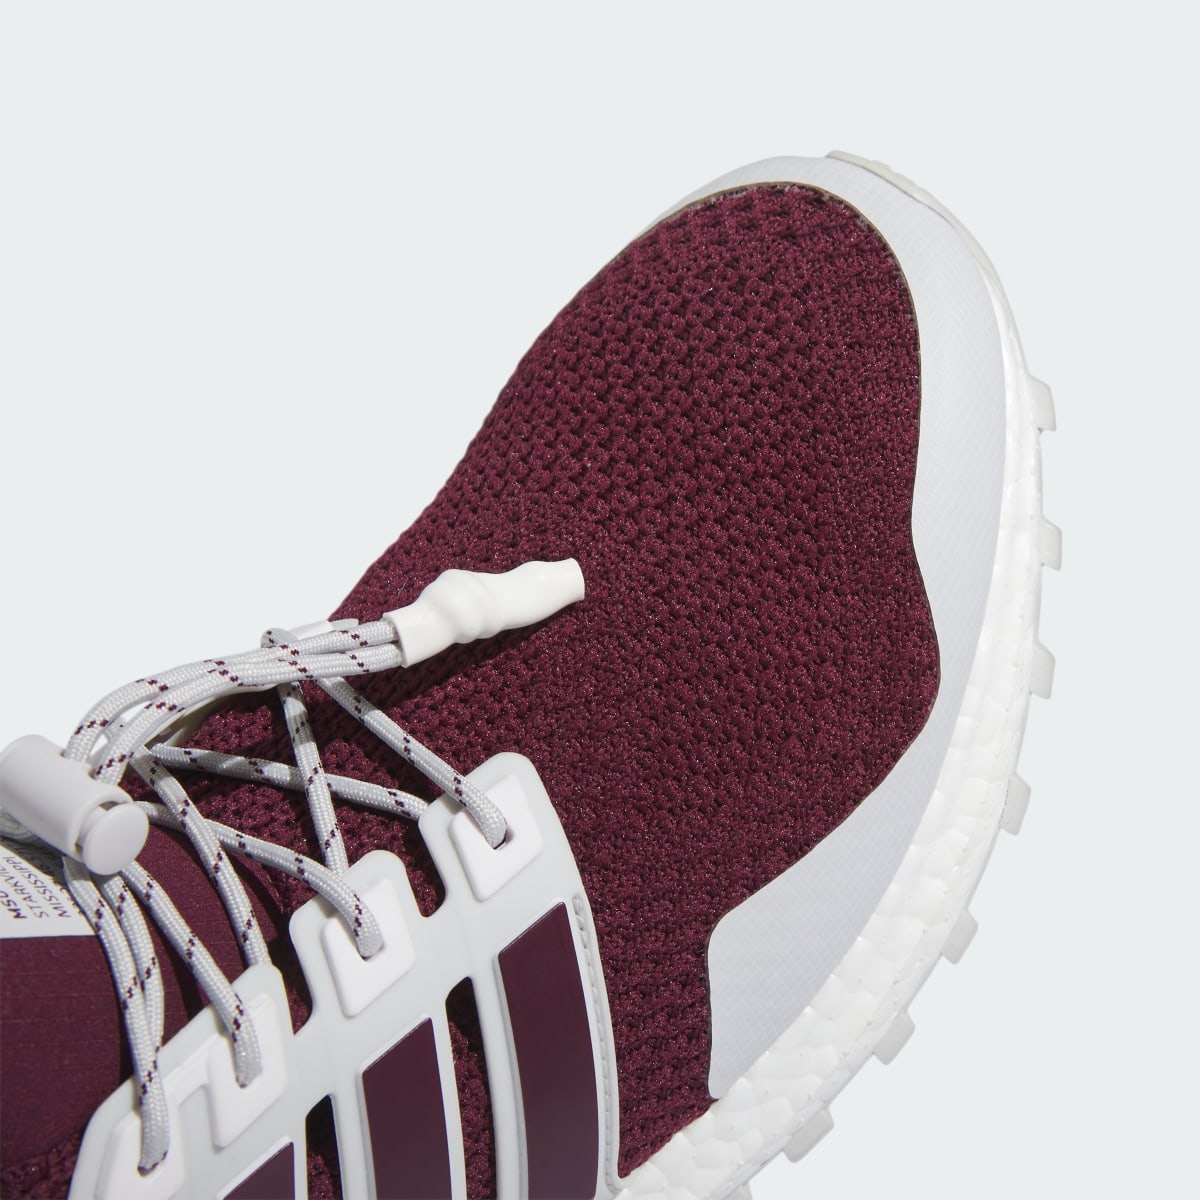 Adidas Mississippi State Ultraboost 1.0 Shoes. 9